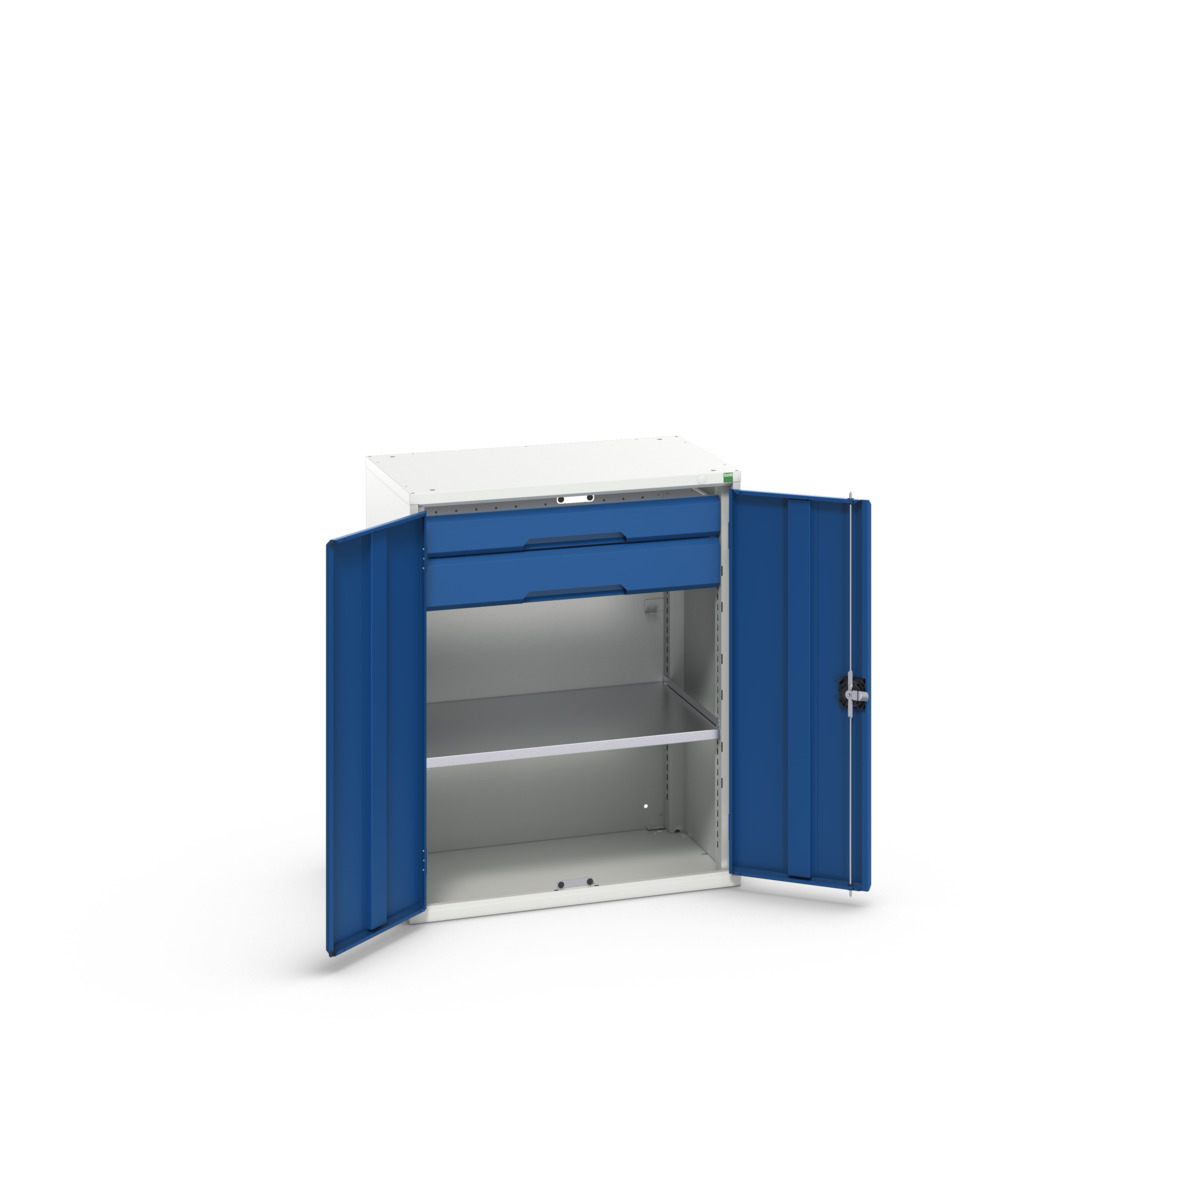 16926453.11 - verso kitted cupboard